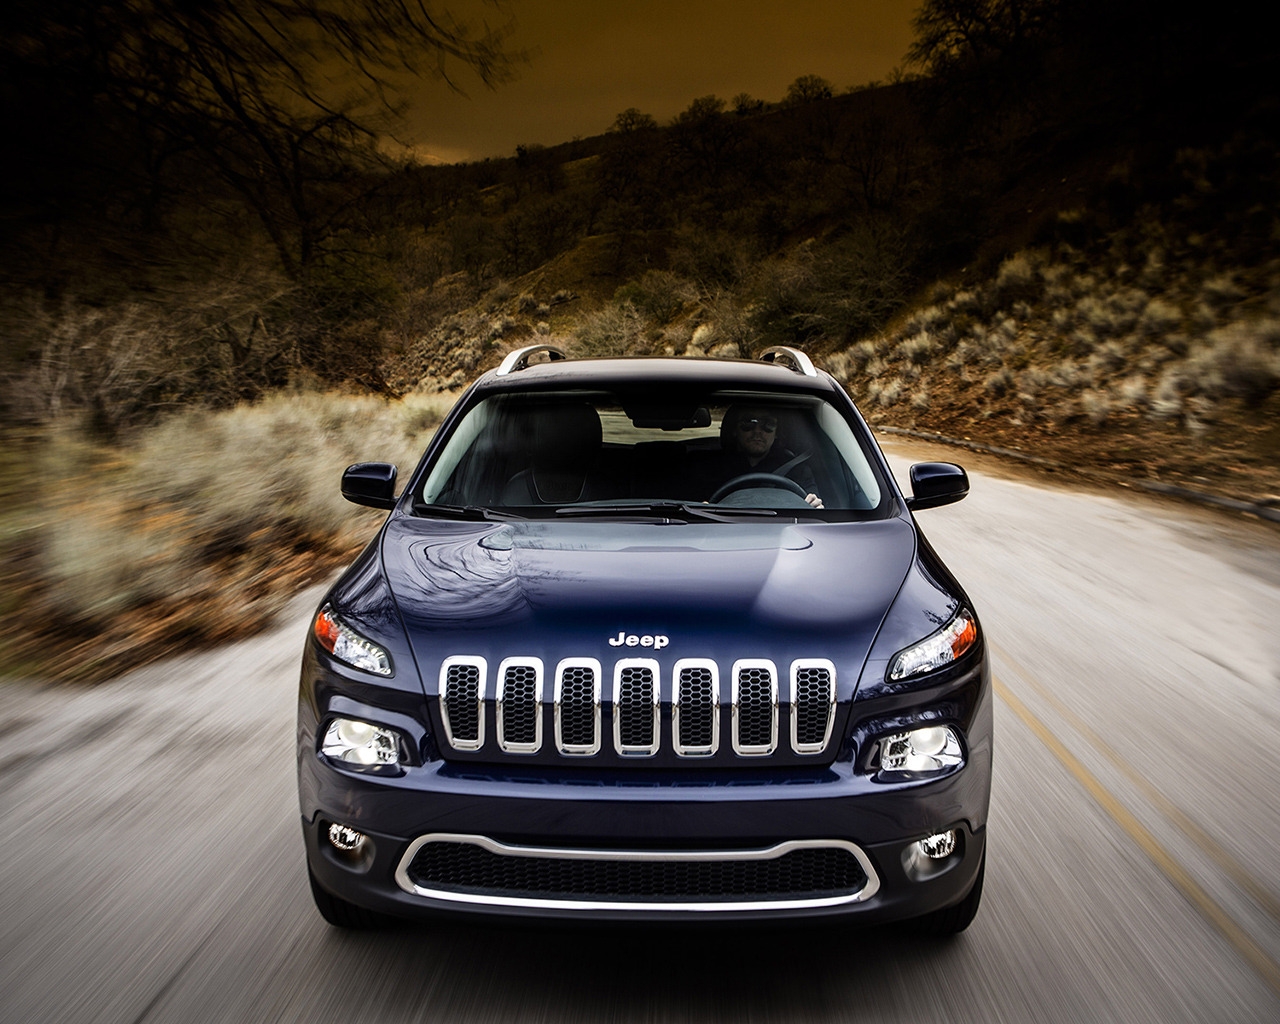 2014 Jeep Cherokee for 1280 x 1024 resolution